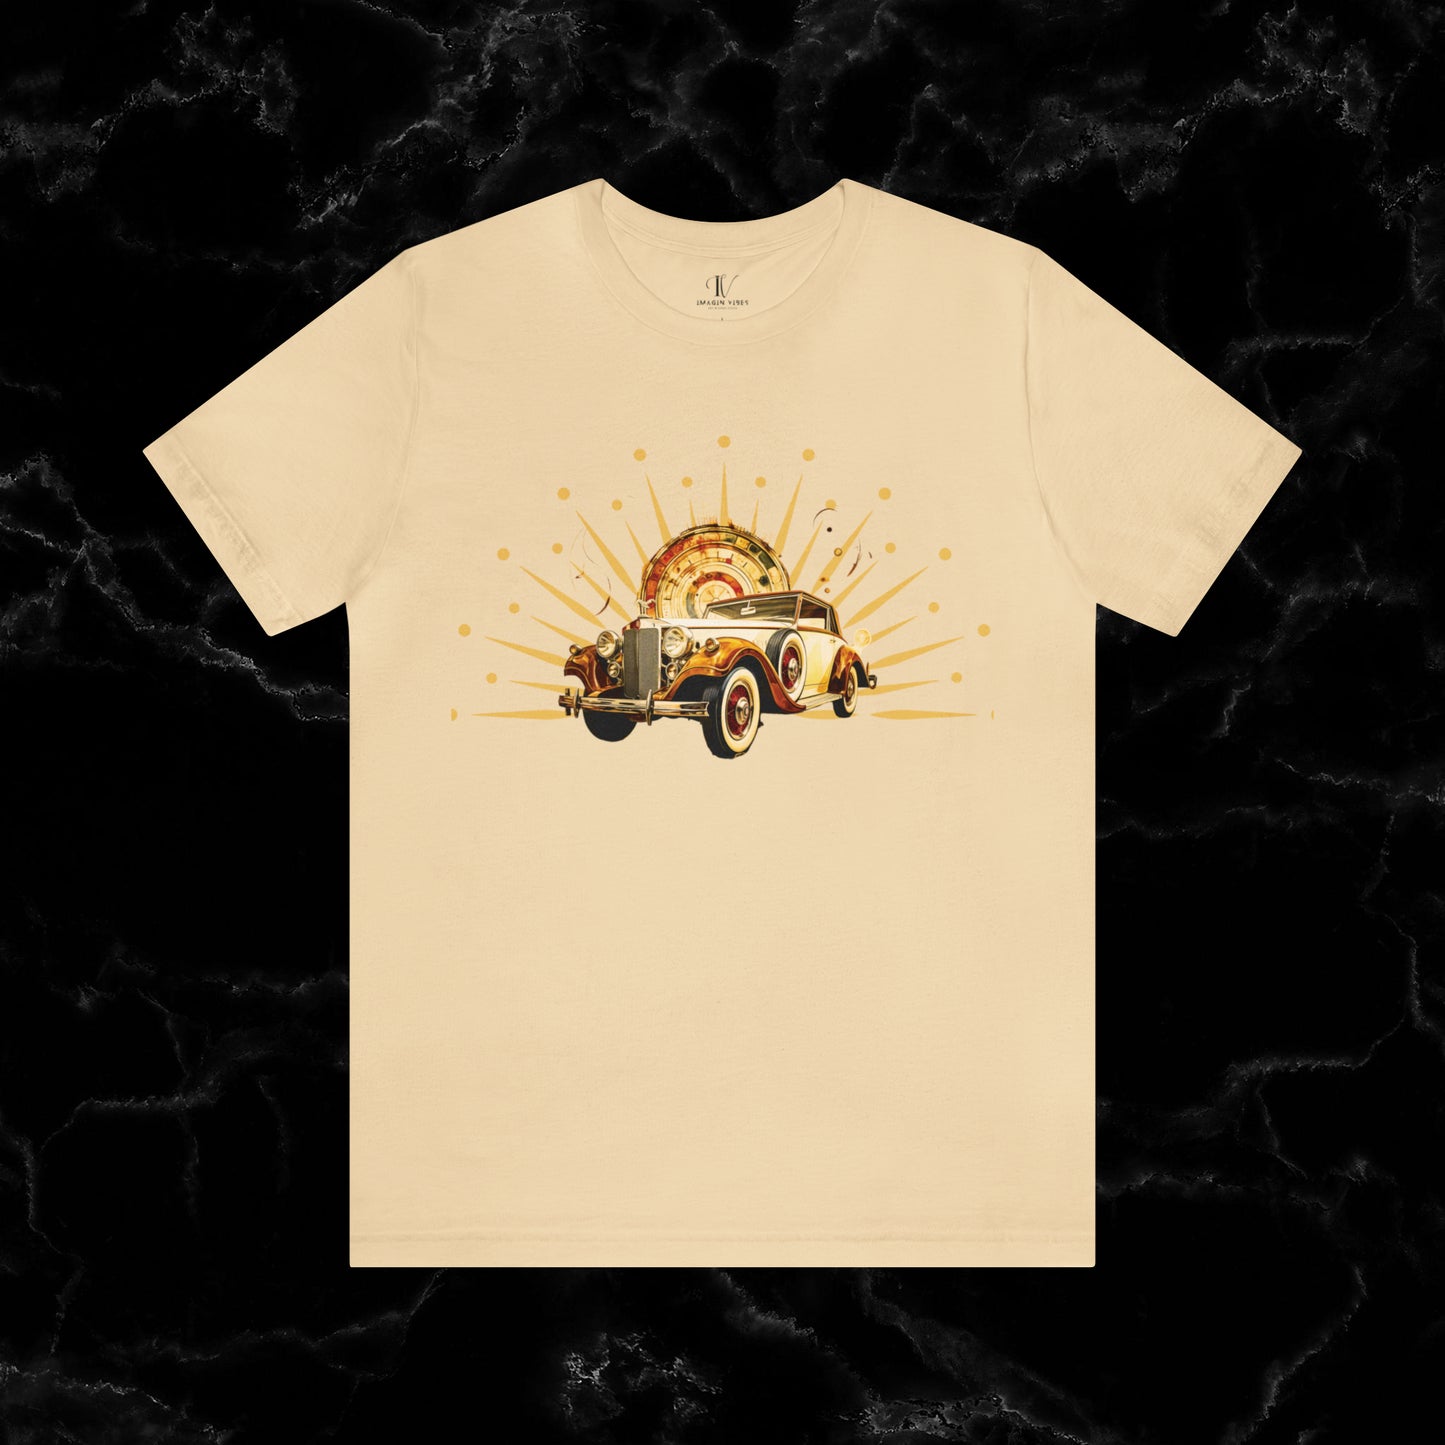 Vintage Car Enthusiast T-Shirt with Classic Wheels and Timeless Appeal Nostalgic T-Shirt Soft Cream S 